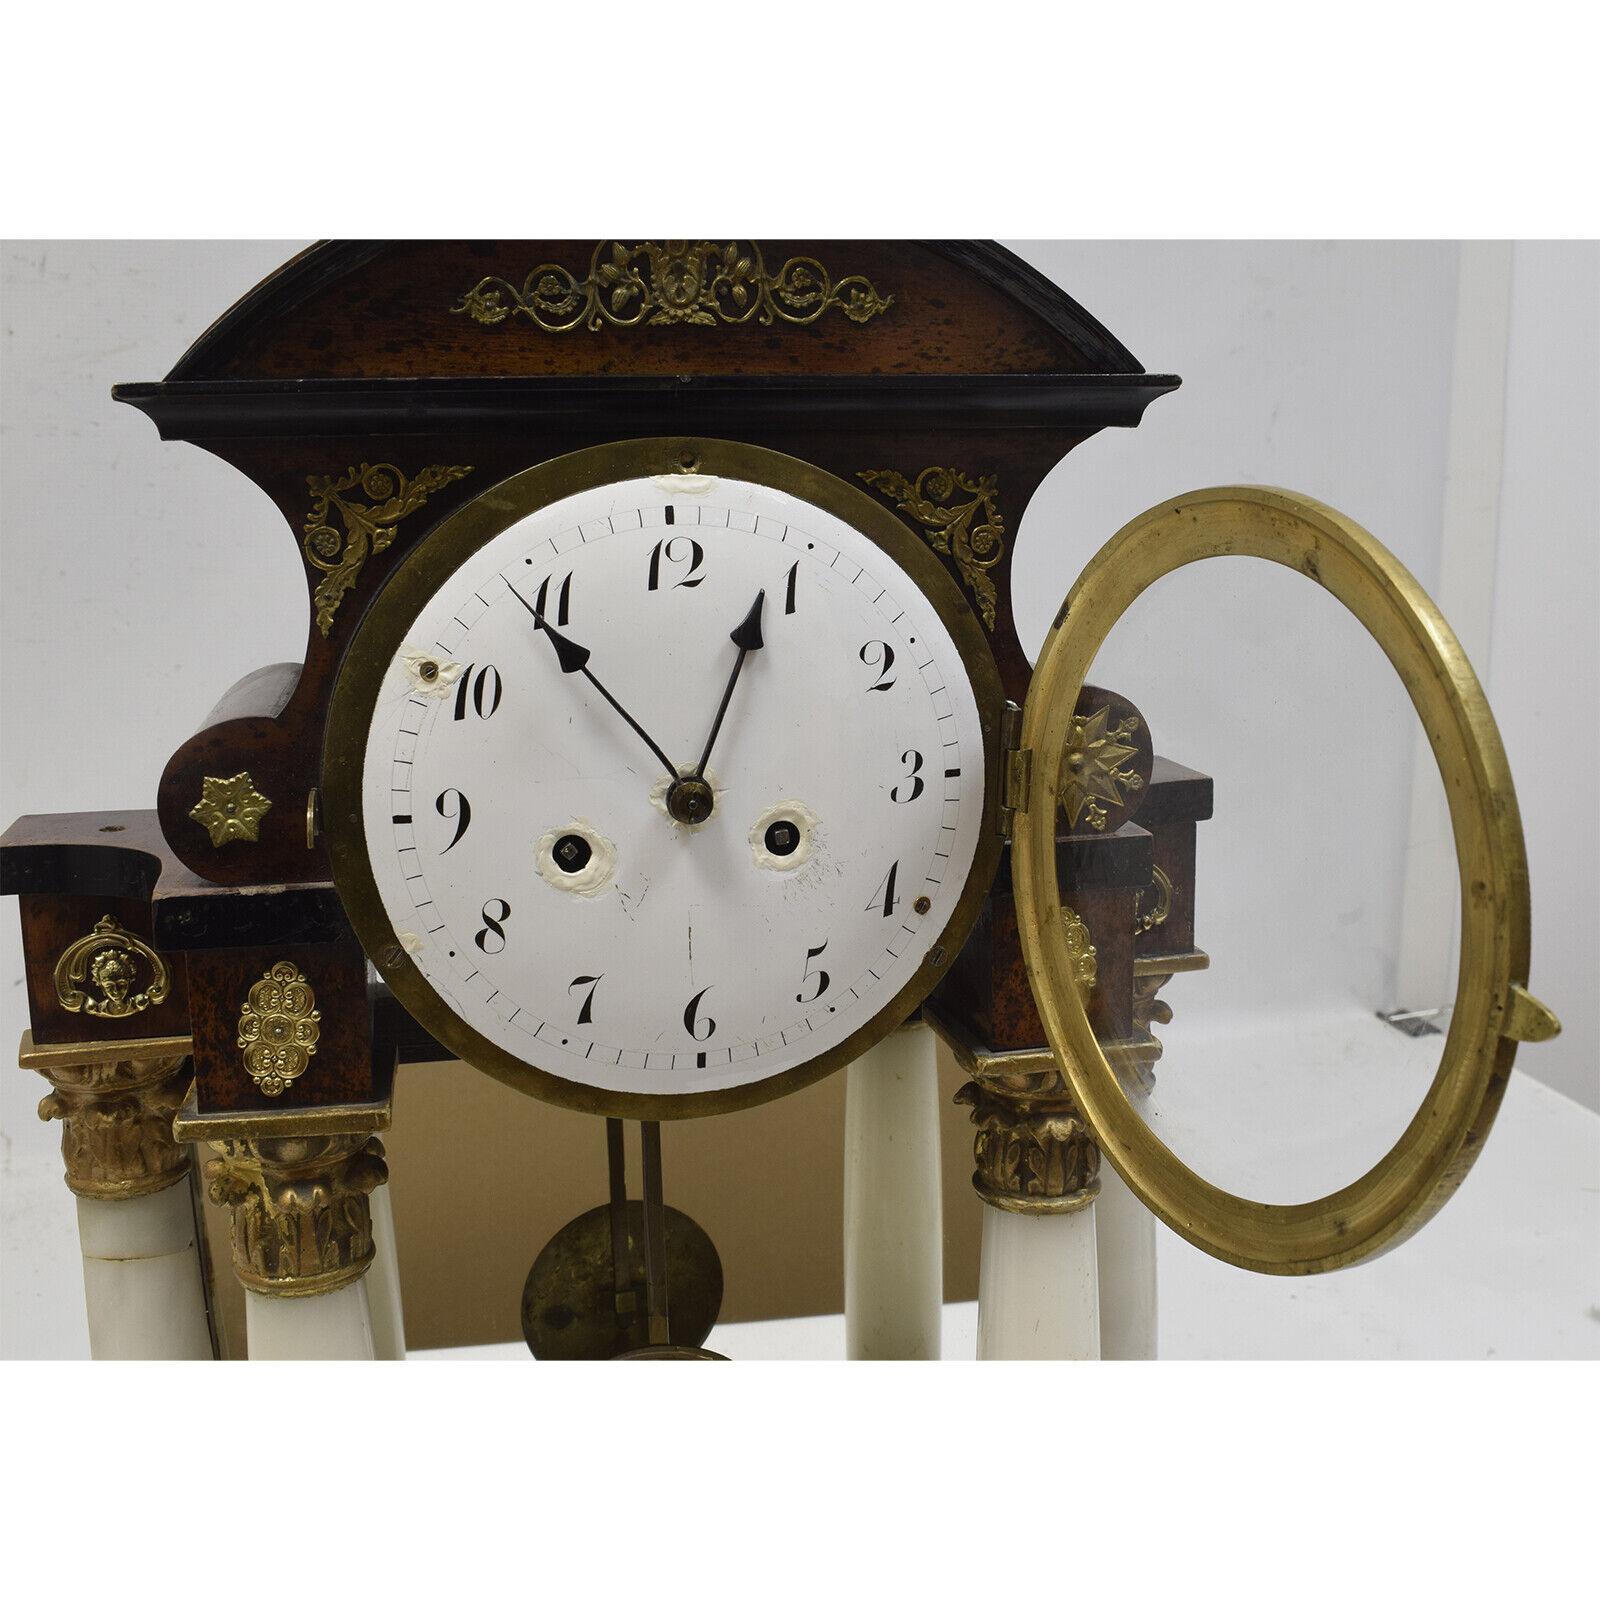 19th Century Functional Column Clock: Antique Mantel Clock with Portico, 1G05 For Sale 2